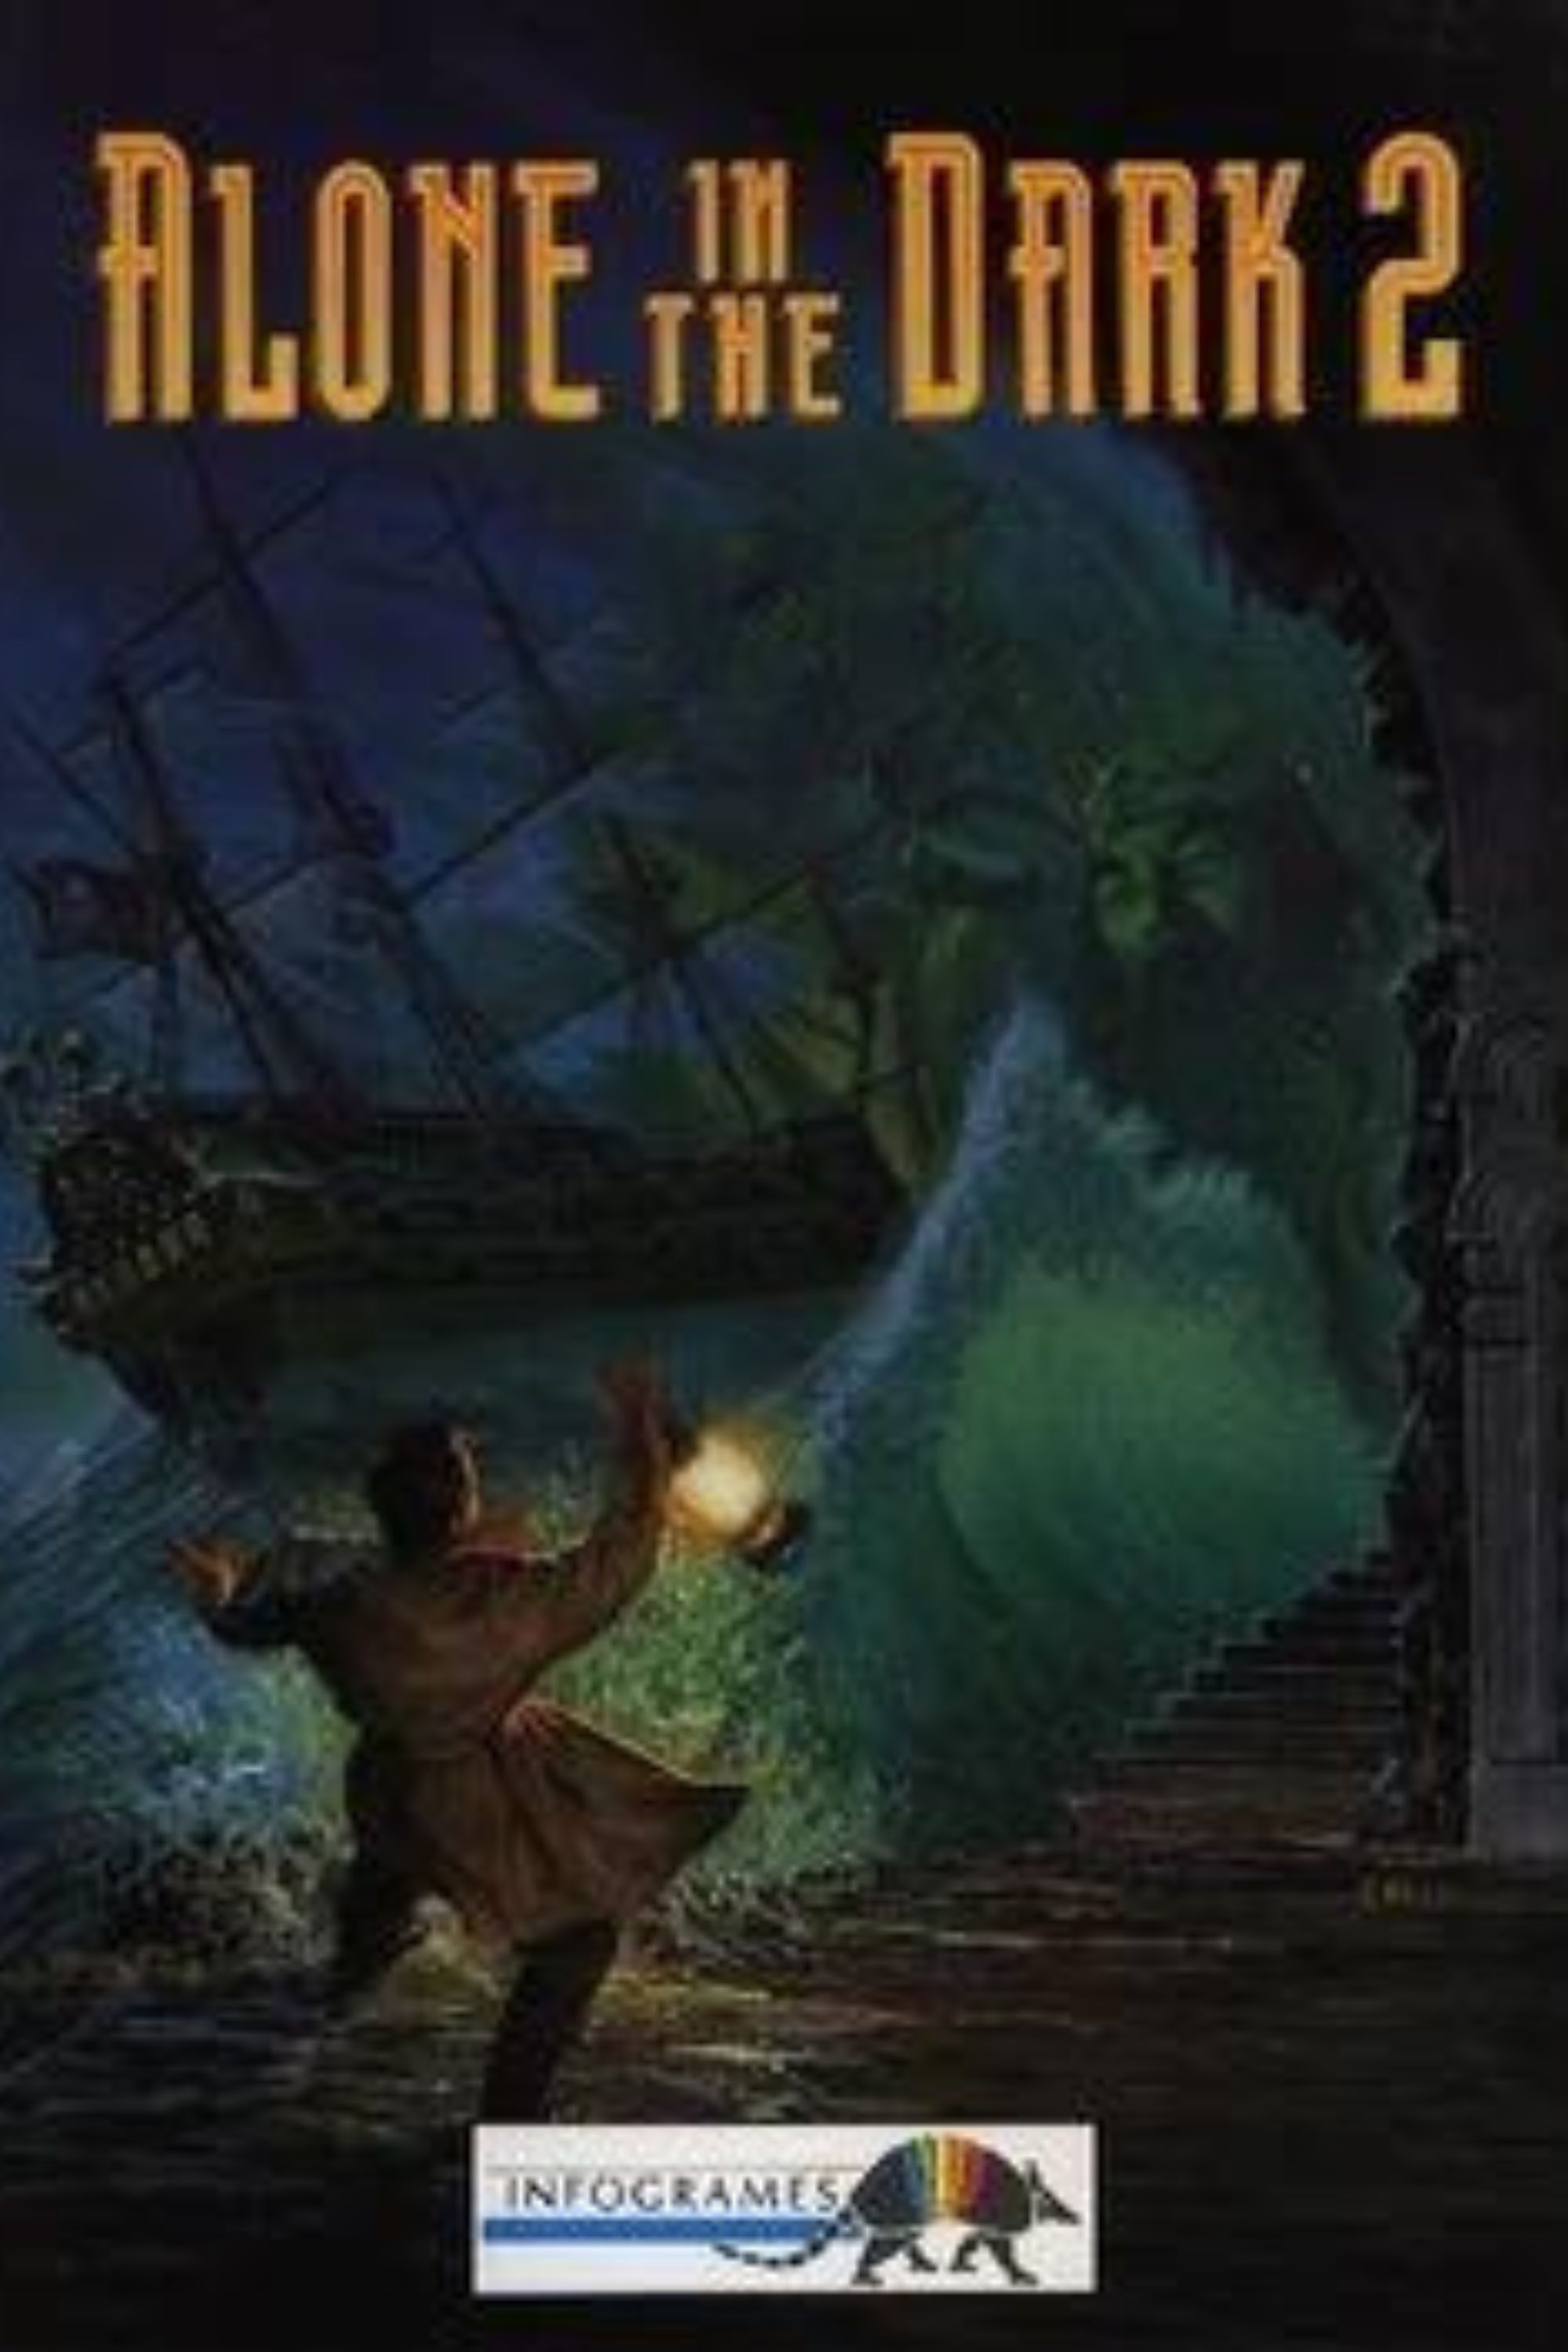 Cover image for Alone In The Dark 2 showing a character holding a lantern next to a ship